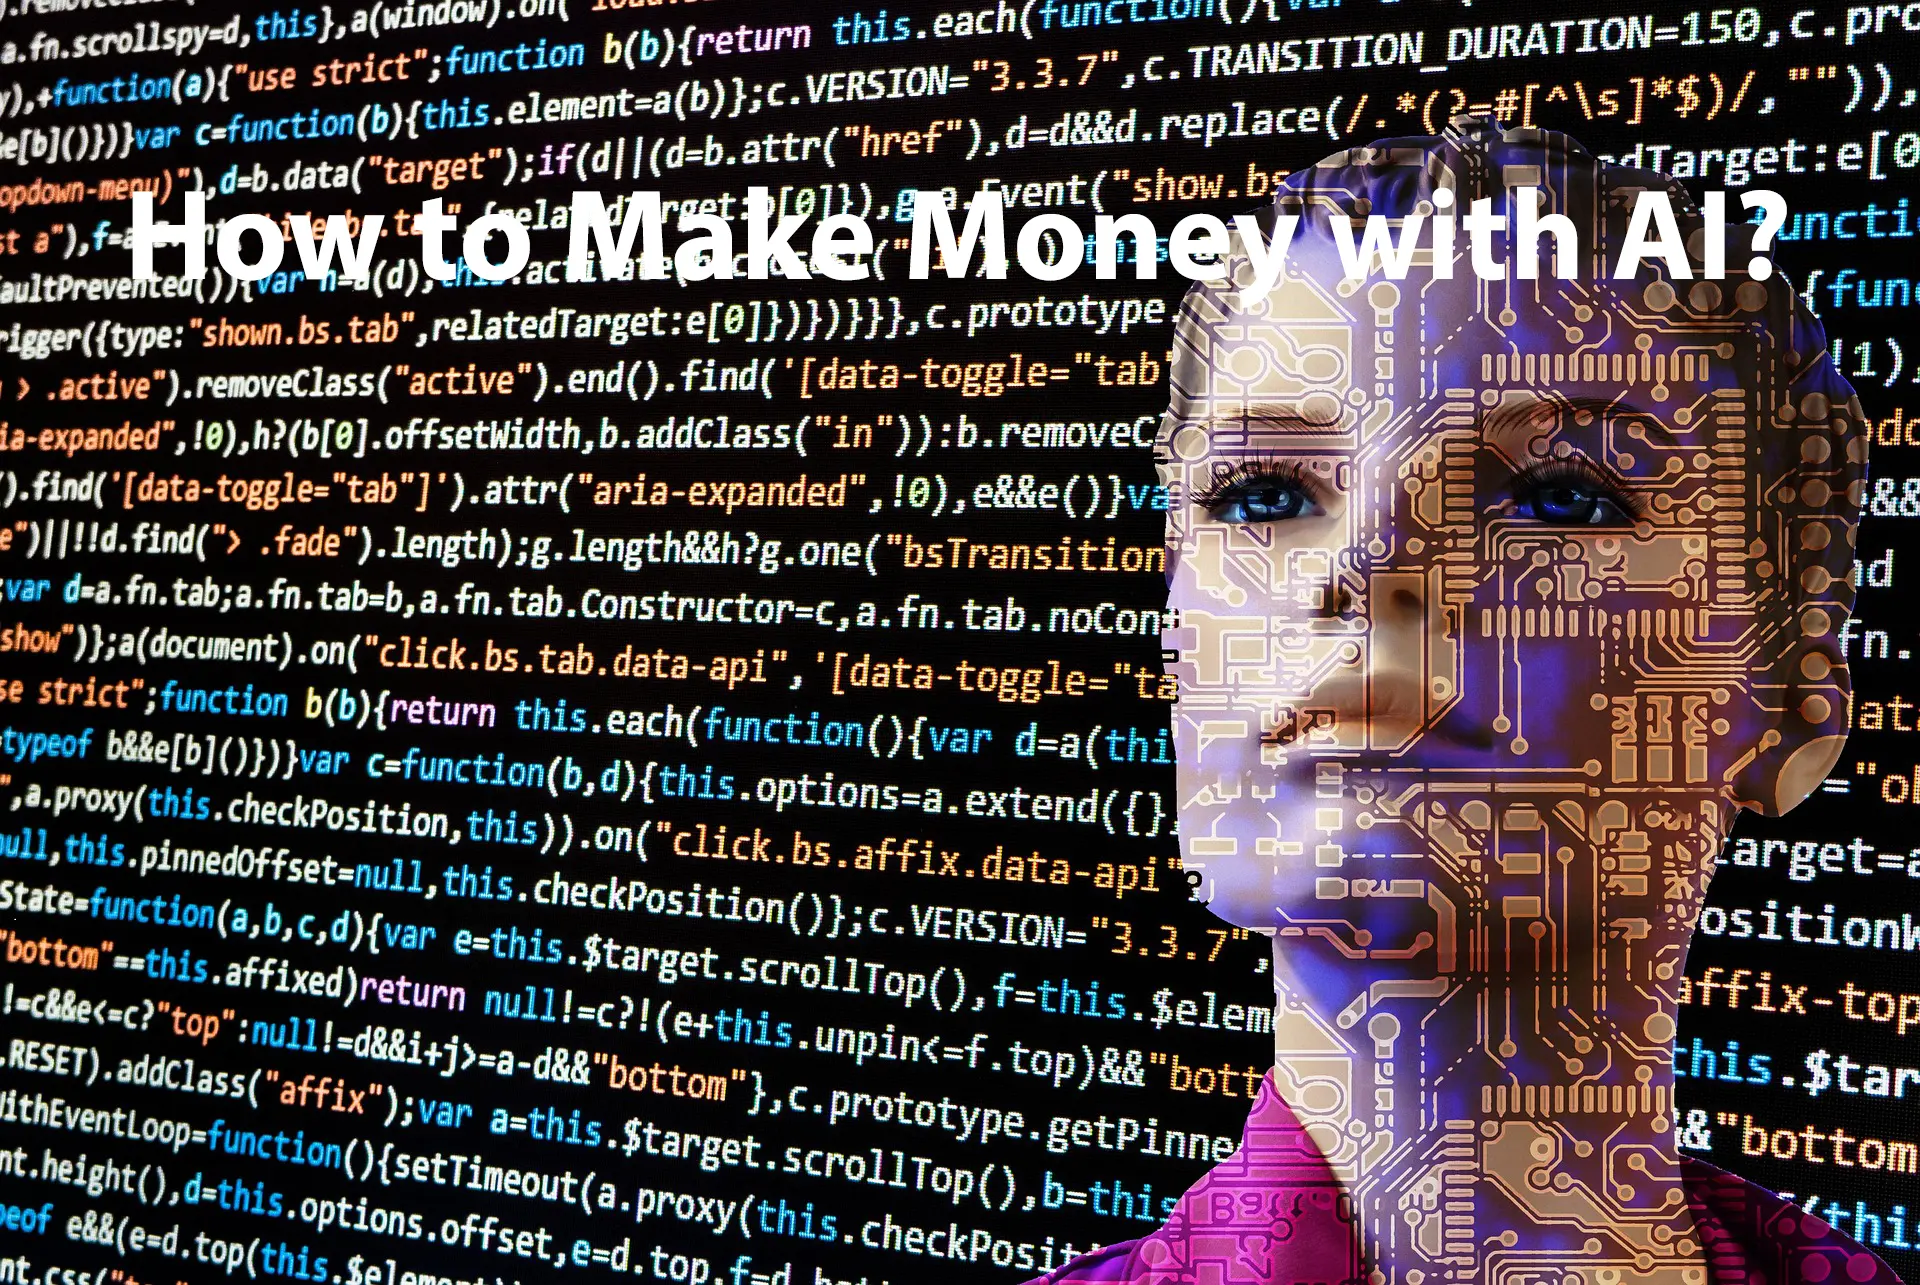 How to Make Money with AI?